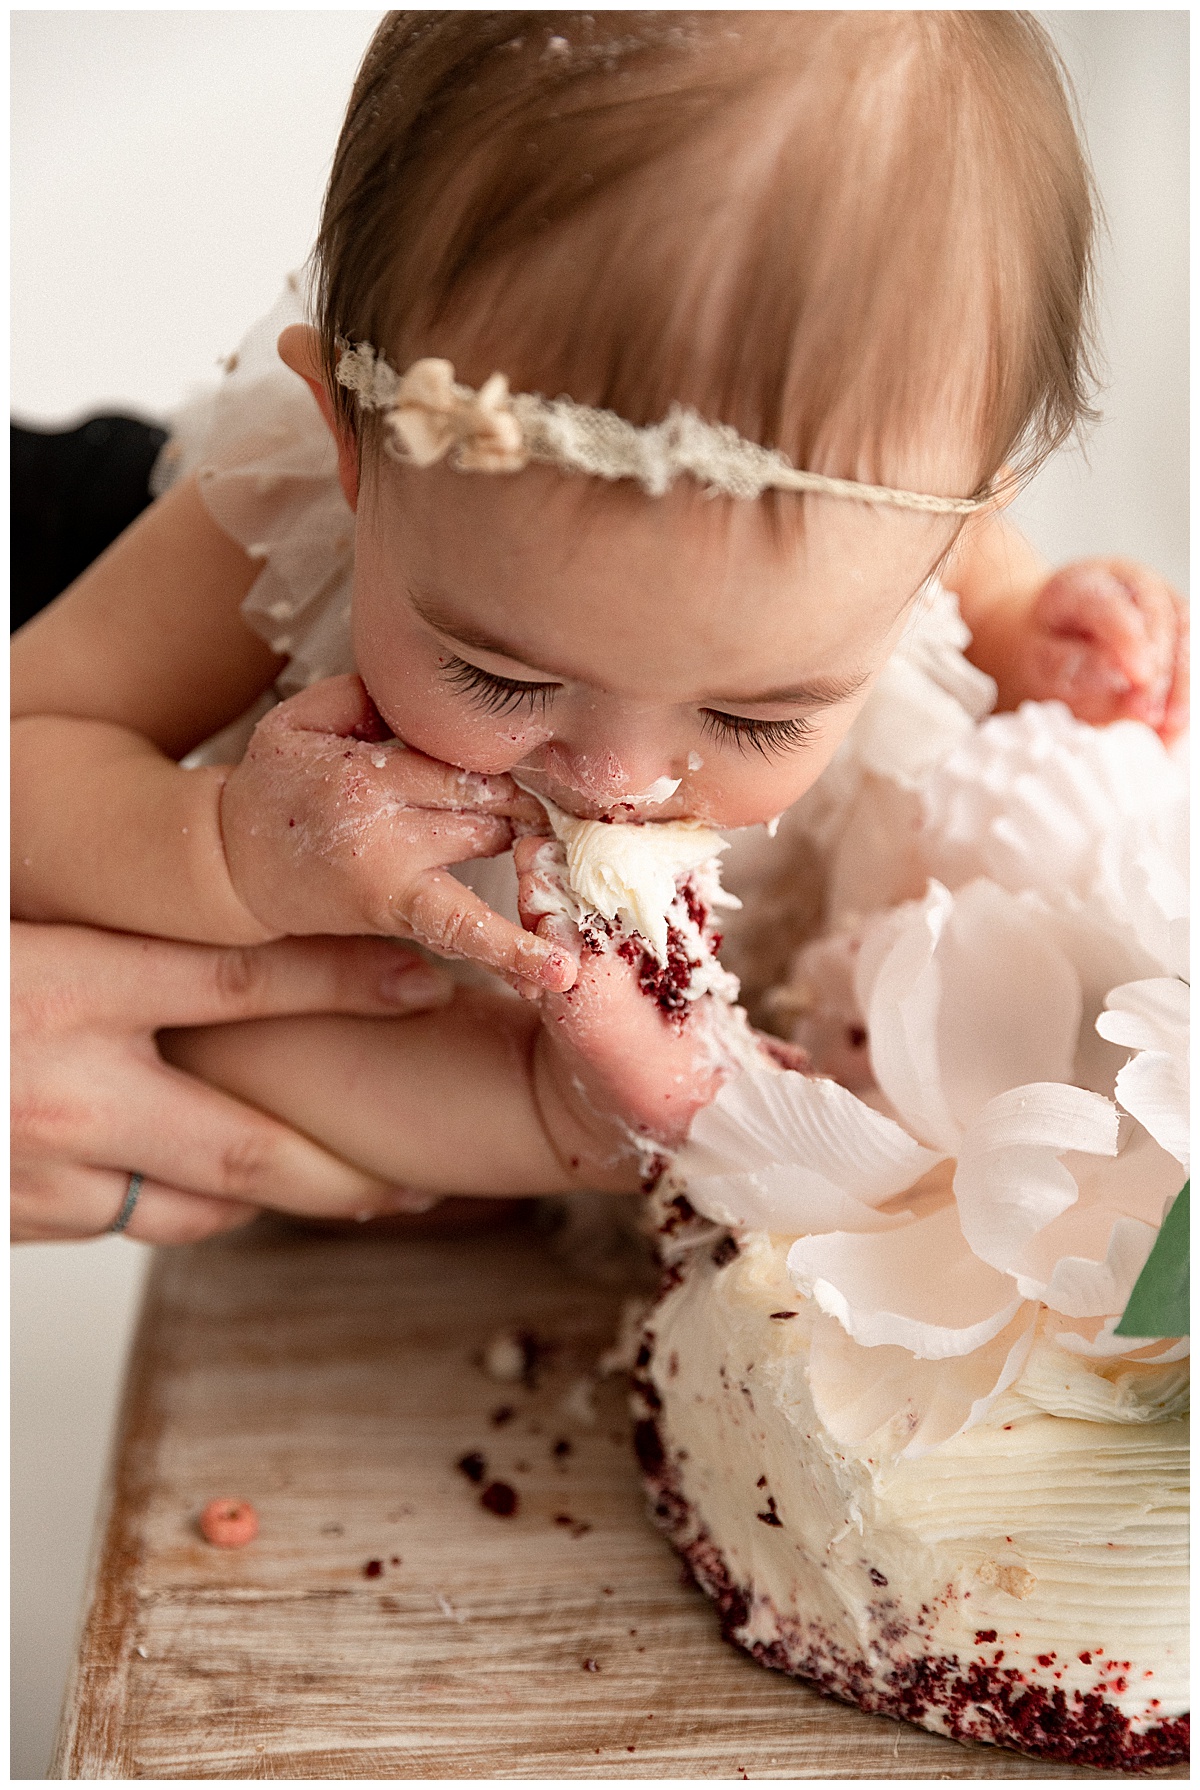 Baby licking toe with cake for First Birthday Cake Smash